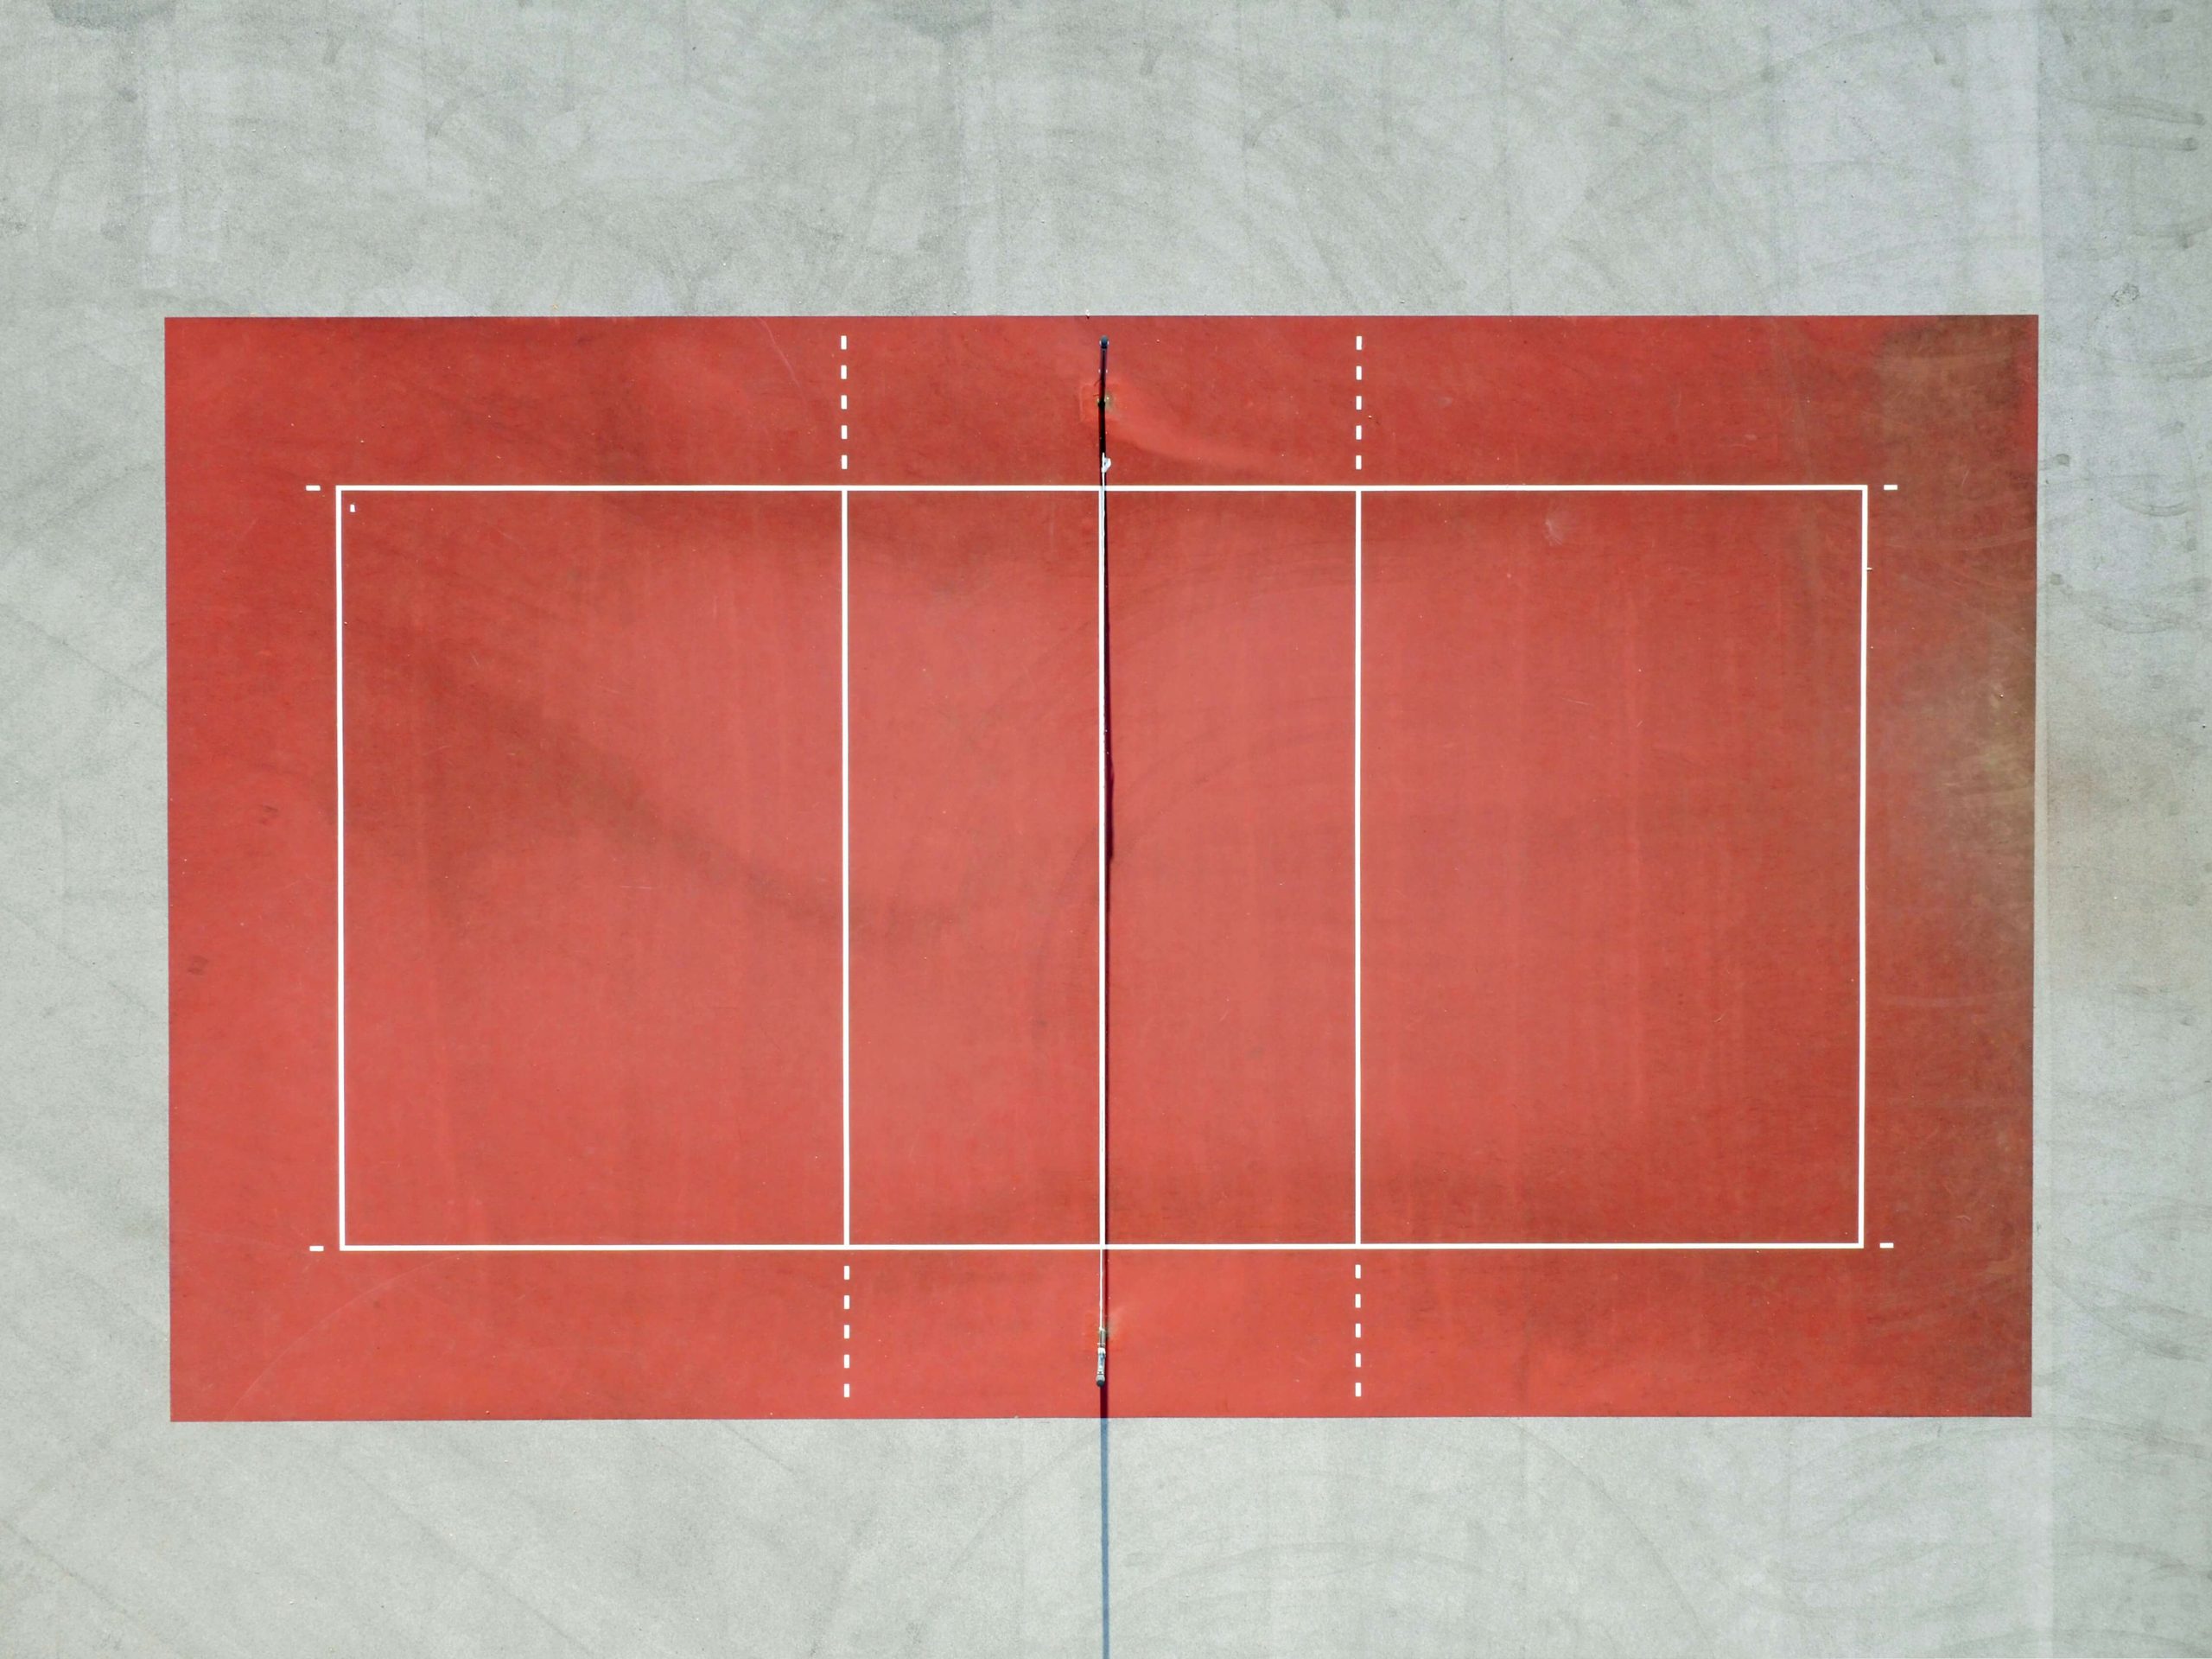 ▷▷ Volleyball Court Dimensions & Lines